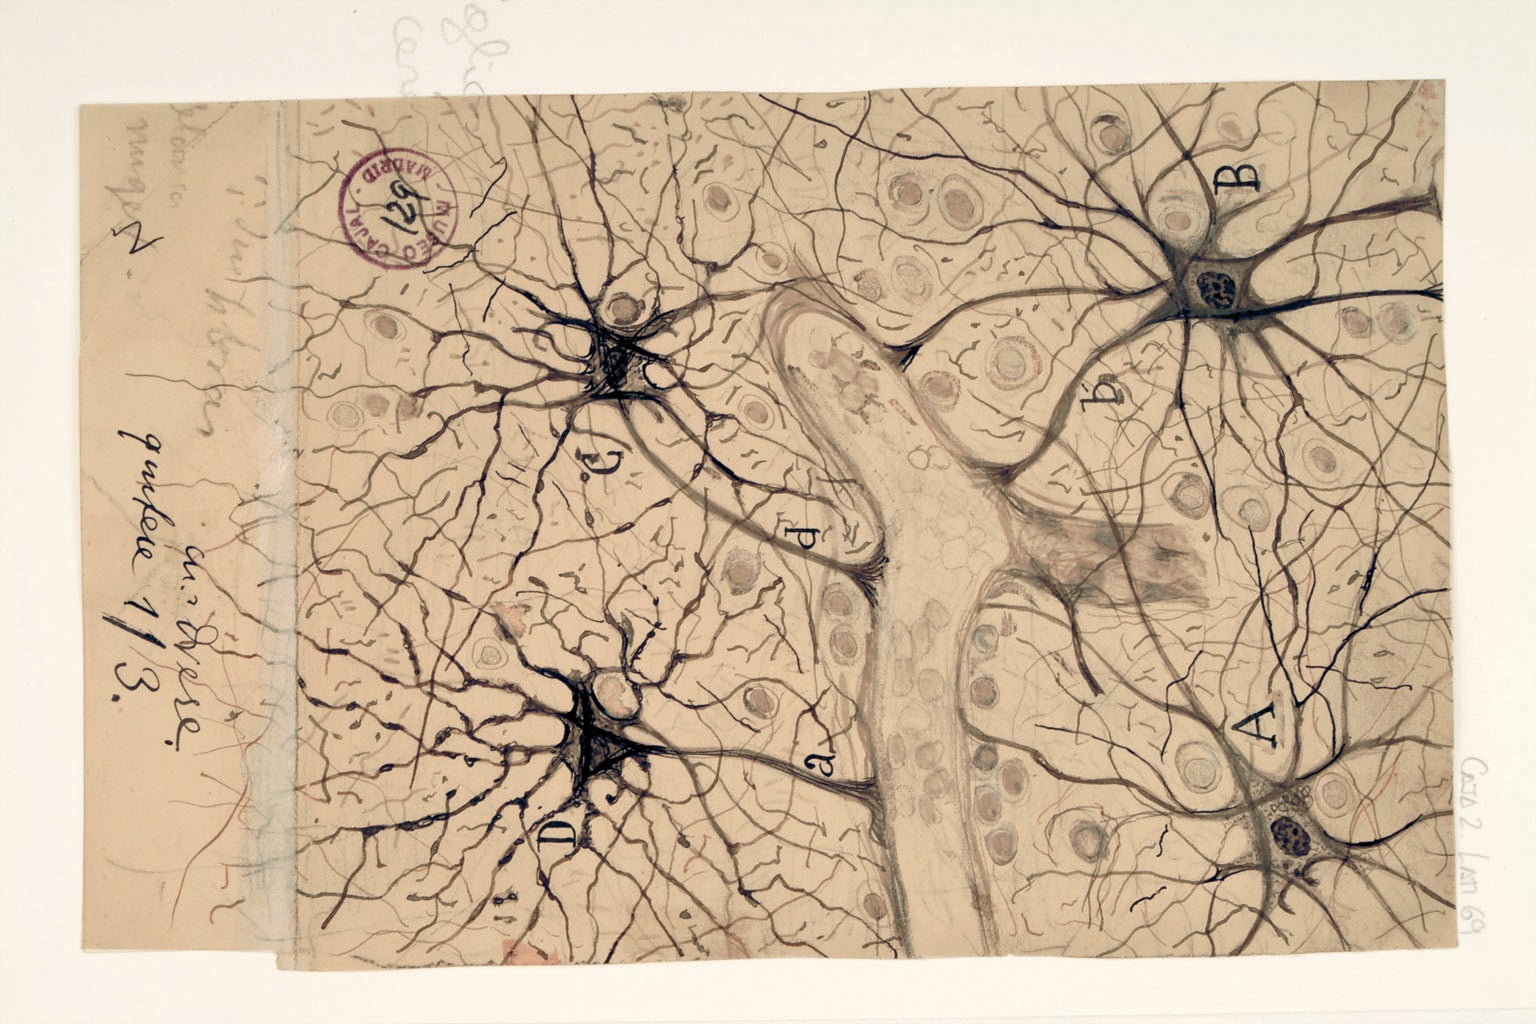 Astrocytes, support cells for neurons, surround a blood vessel.